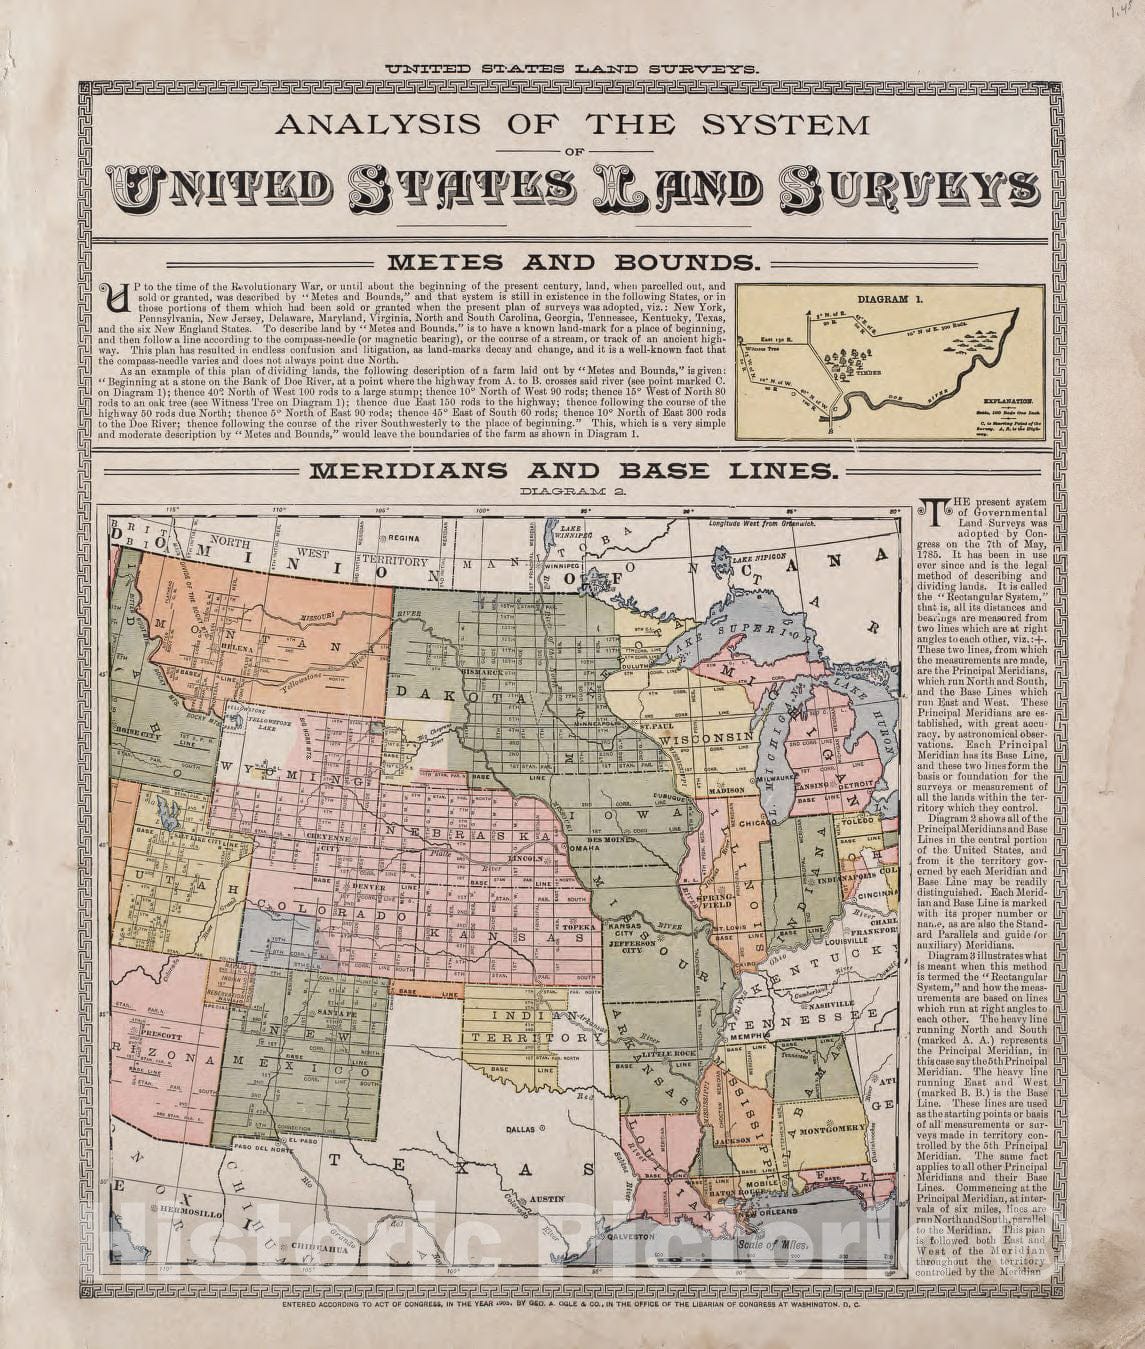 Historic 1909 Map - Standard Atlas of Riley County, Kansas - Analysis of The System of United States Land surveys - 1